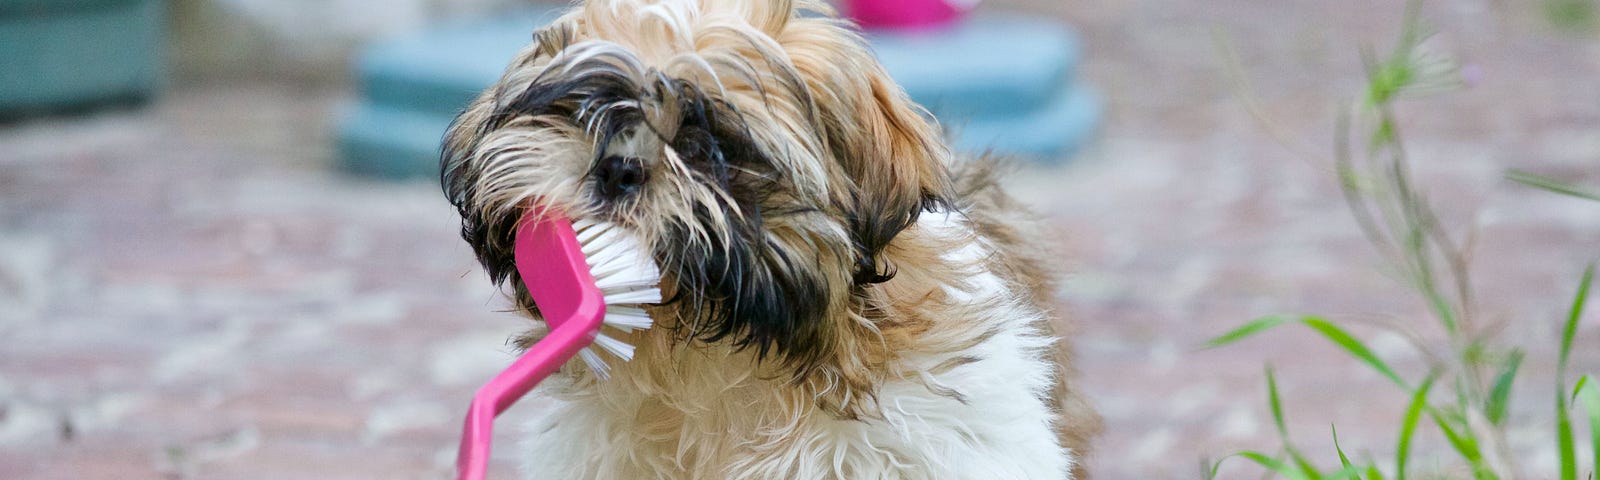 Brown and White Shih Tzu dog holding a dish washing brush in its mouth.